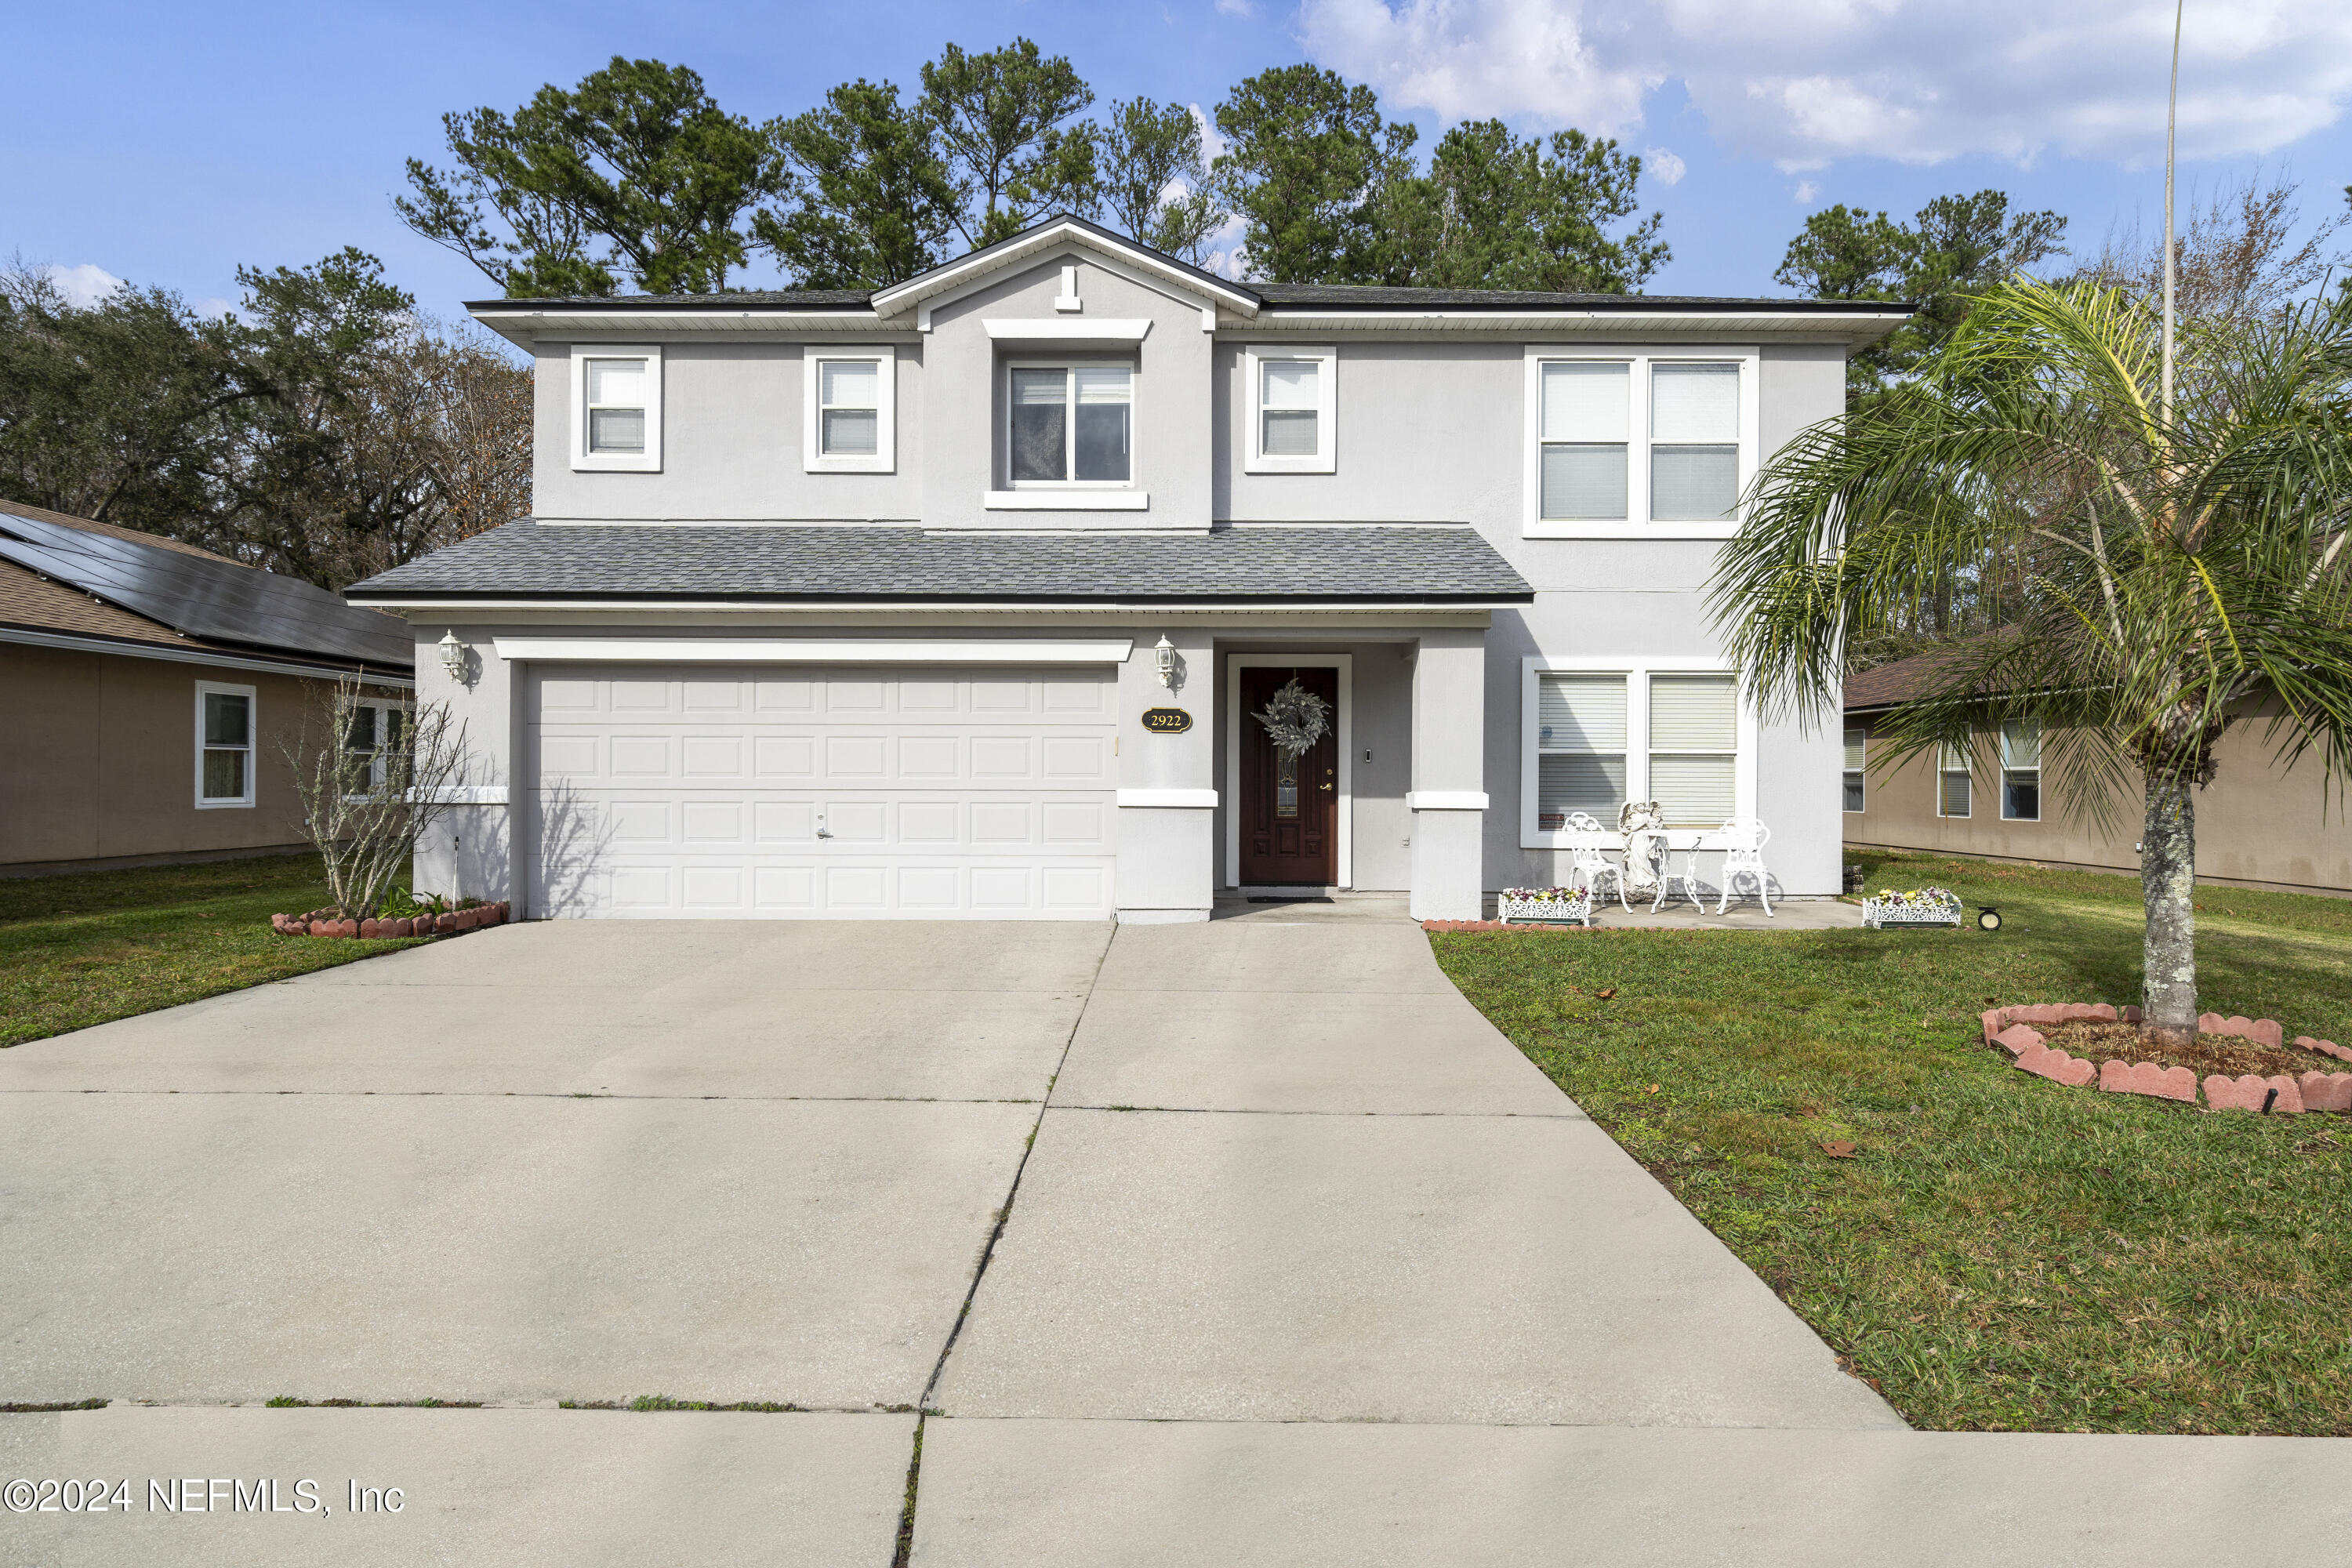 Middleburg, FL home for sale located at 2922 Bent Bow Lane, Middleburg, FL 32068